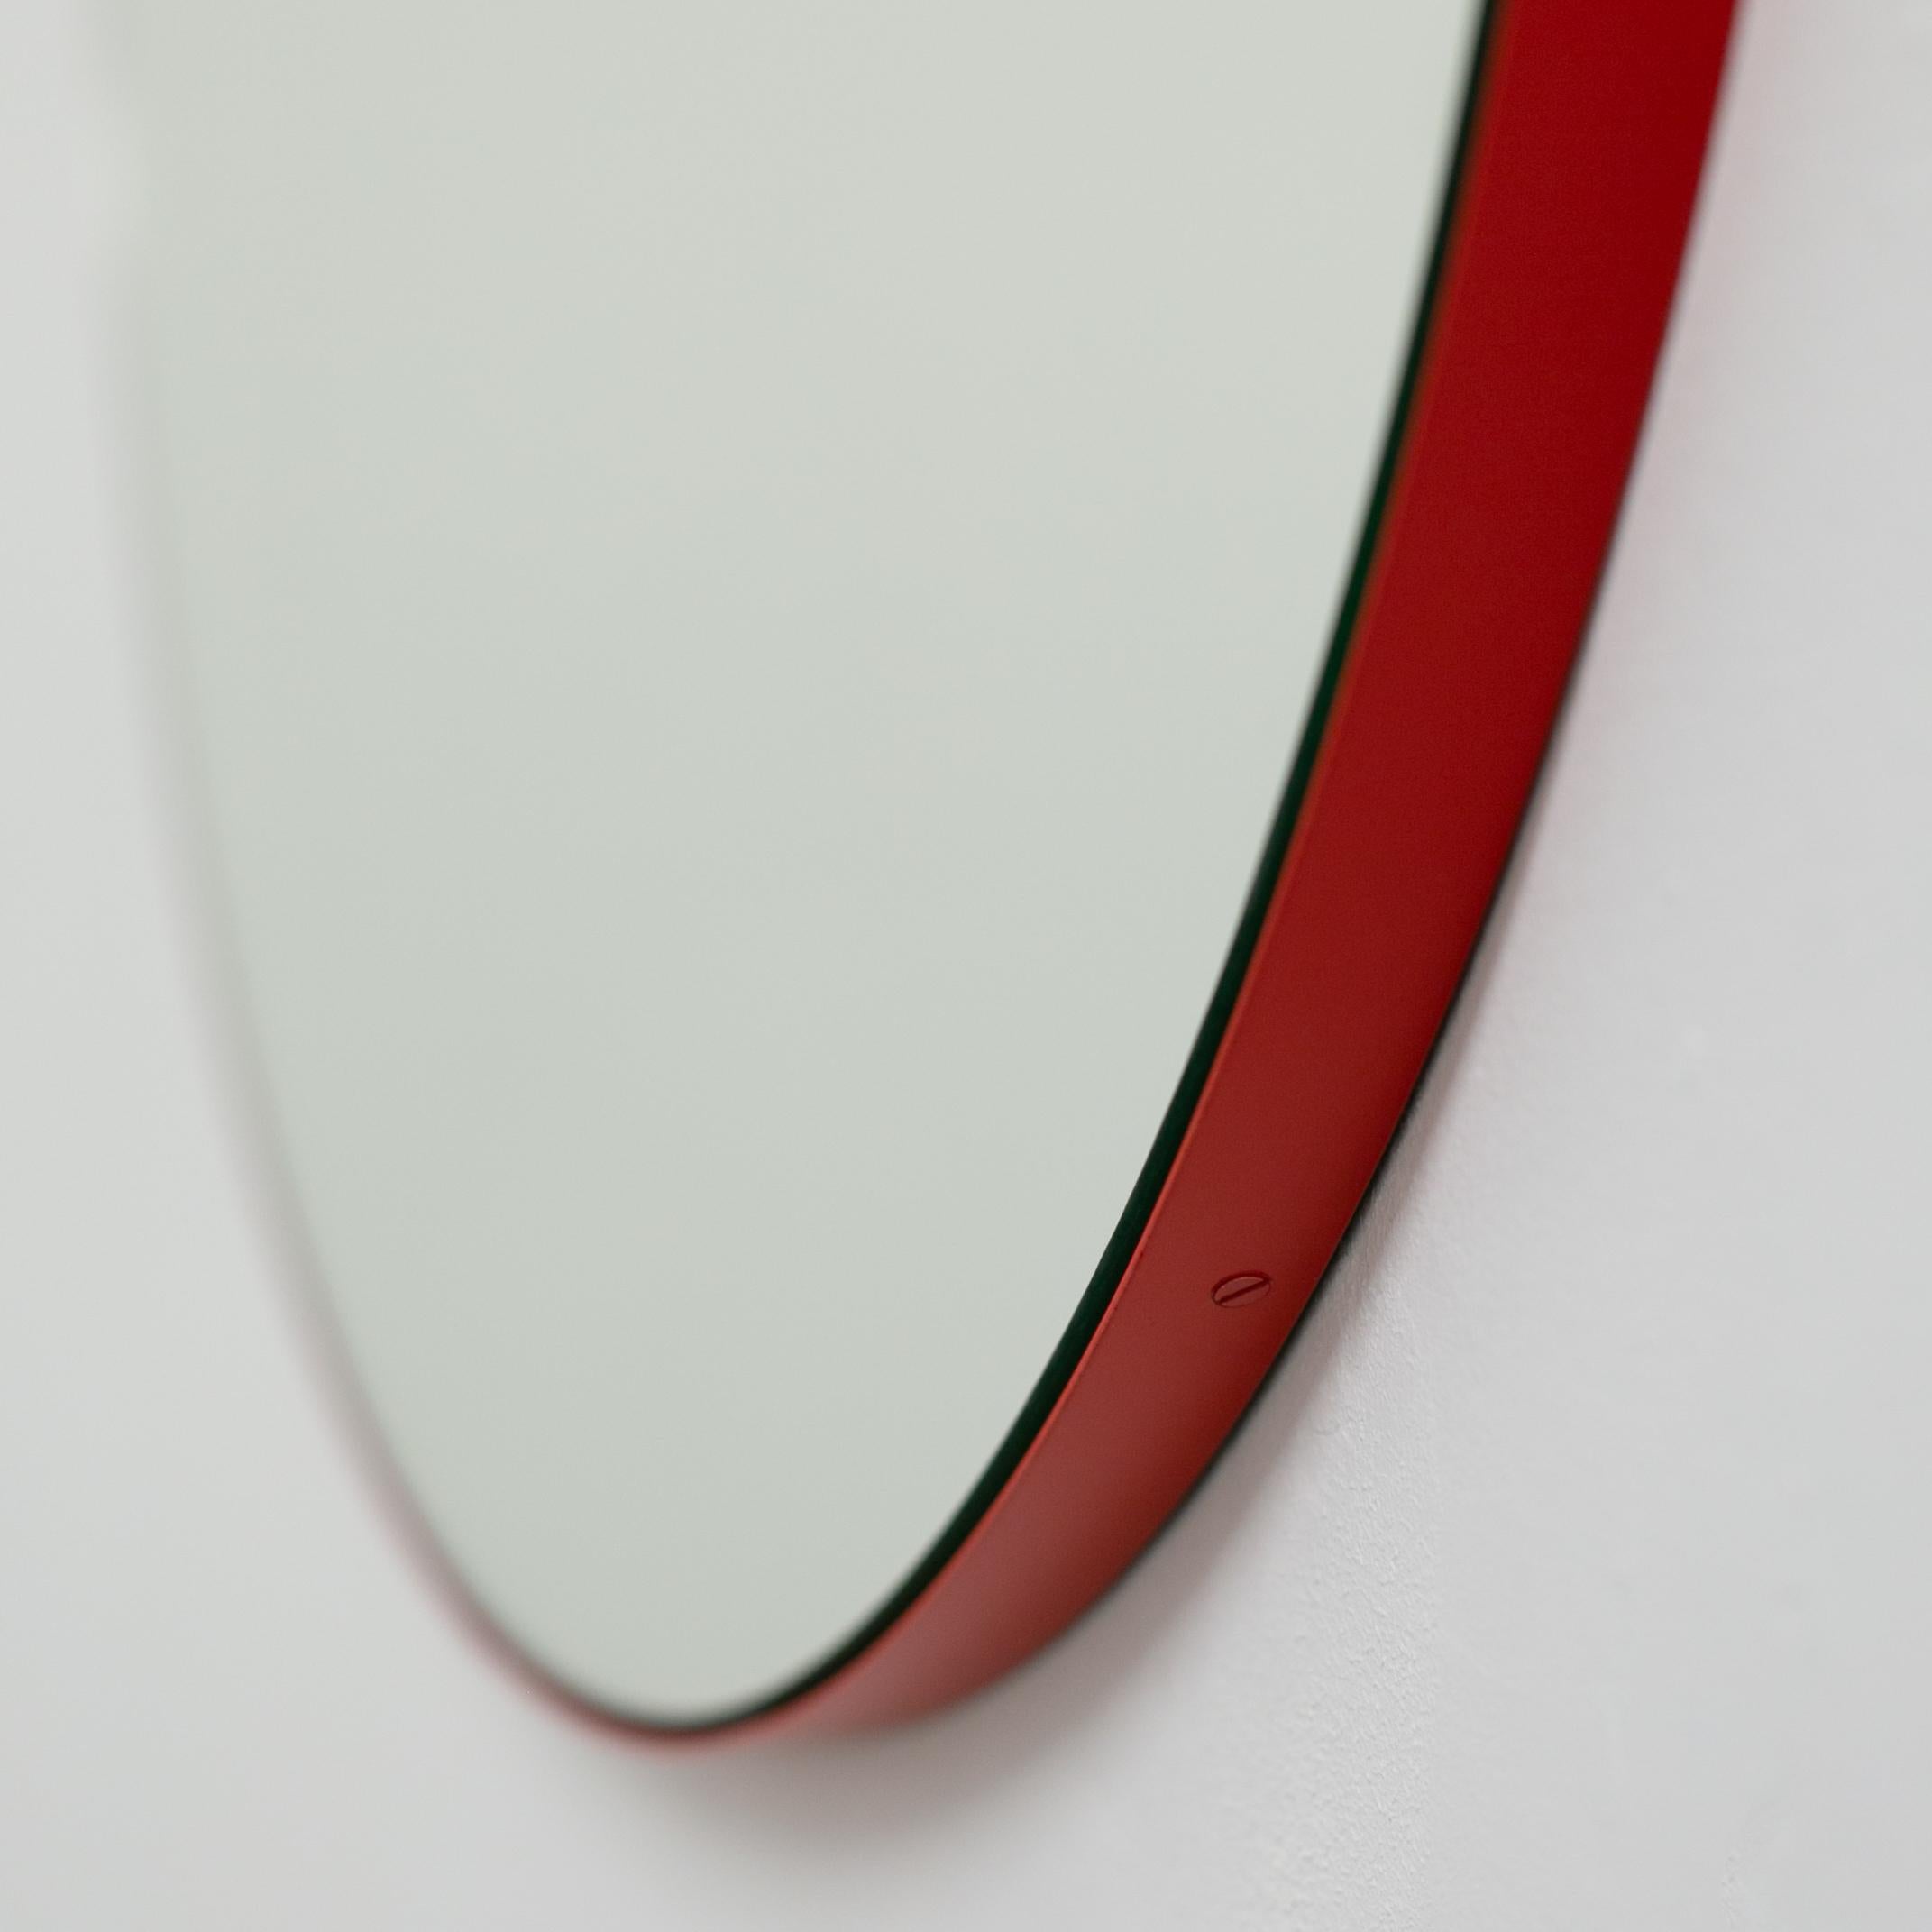 Minimalist round mirror with a modern aluminium powder coated red frame. Designed and handcrafted in London, UK.

Medium, large and extra-large mirrors (60, 80 and 100cm) are fitted with an ingenious French cleat (split batten) system so they may